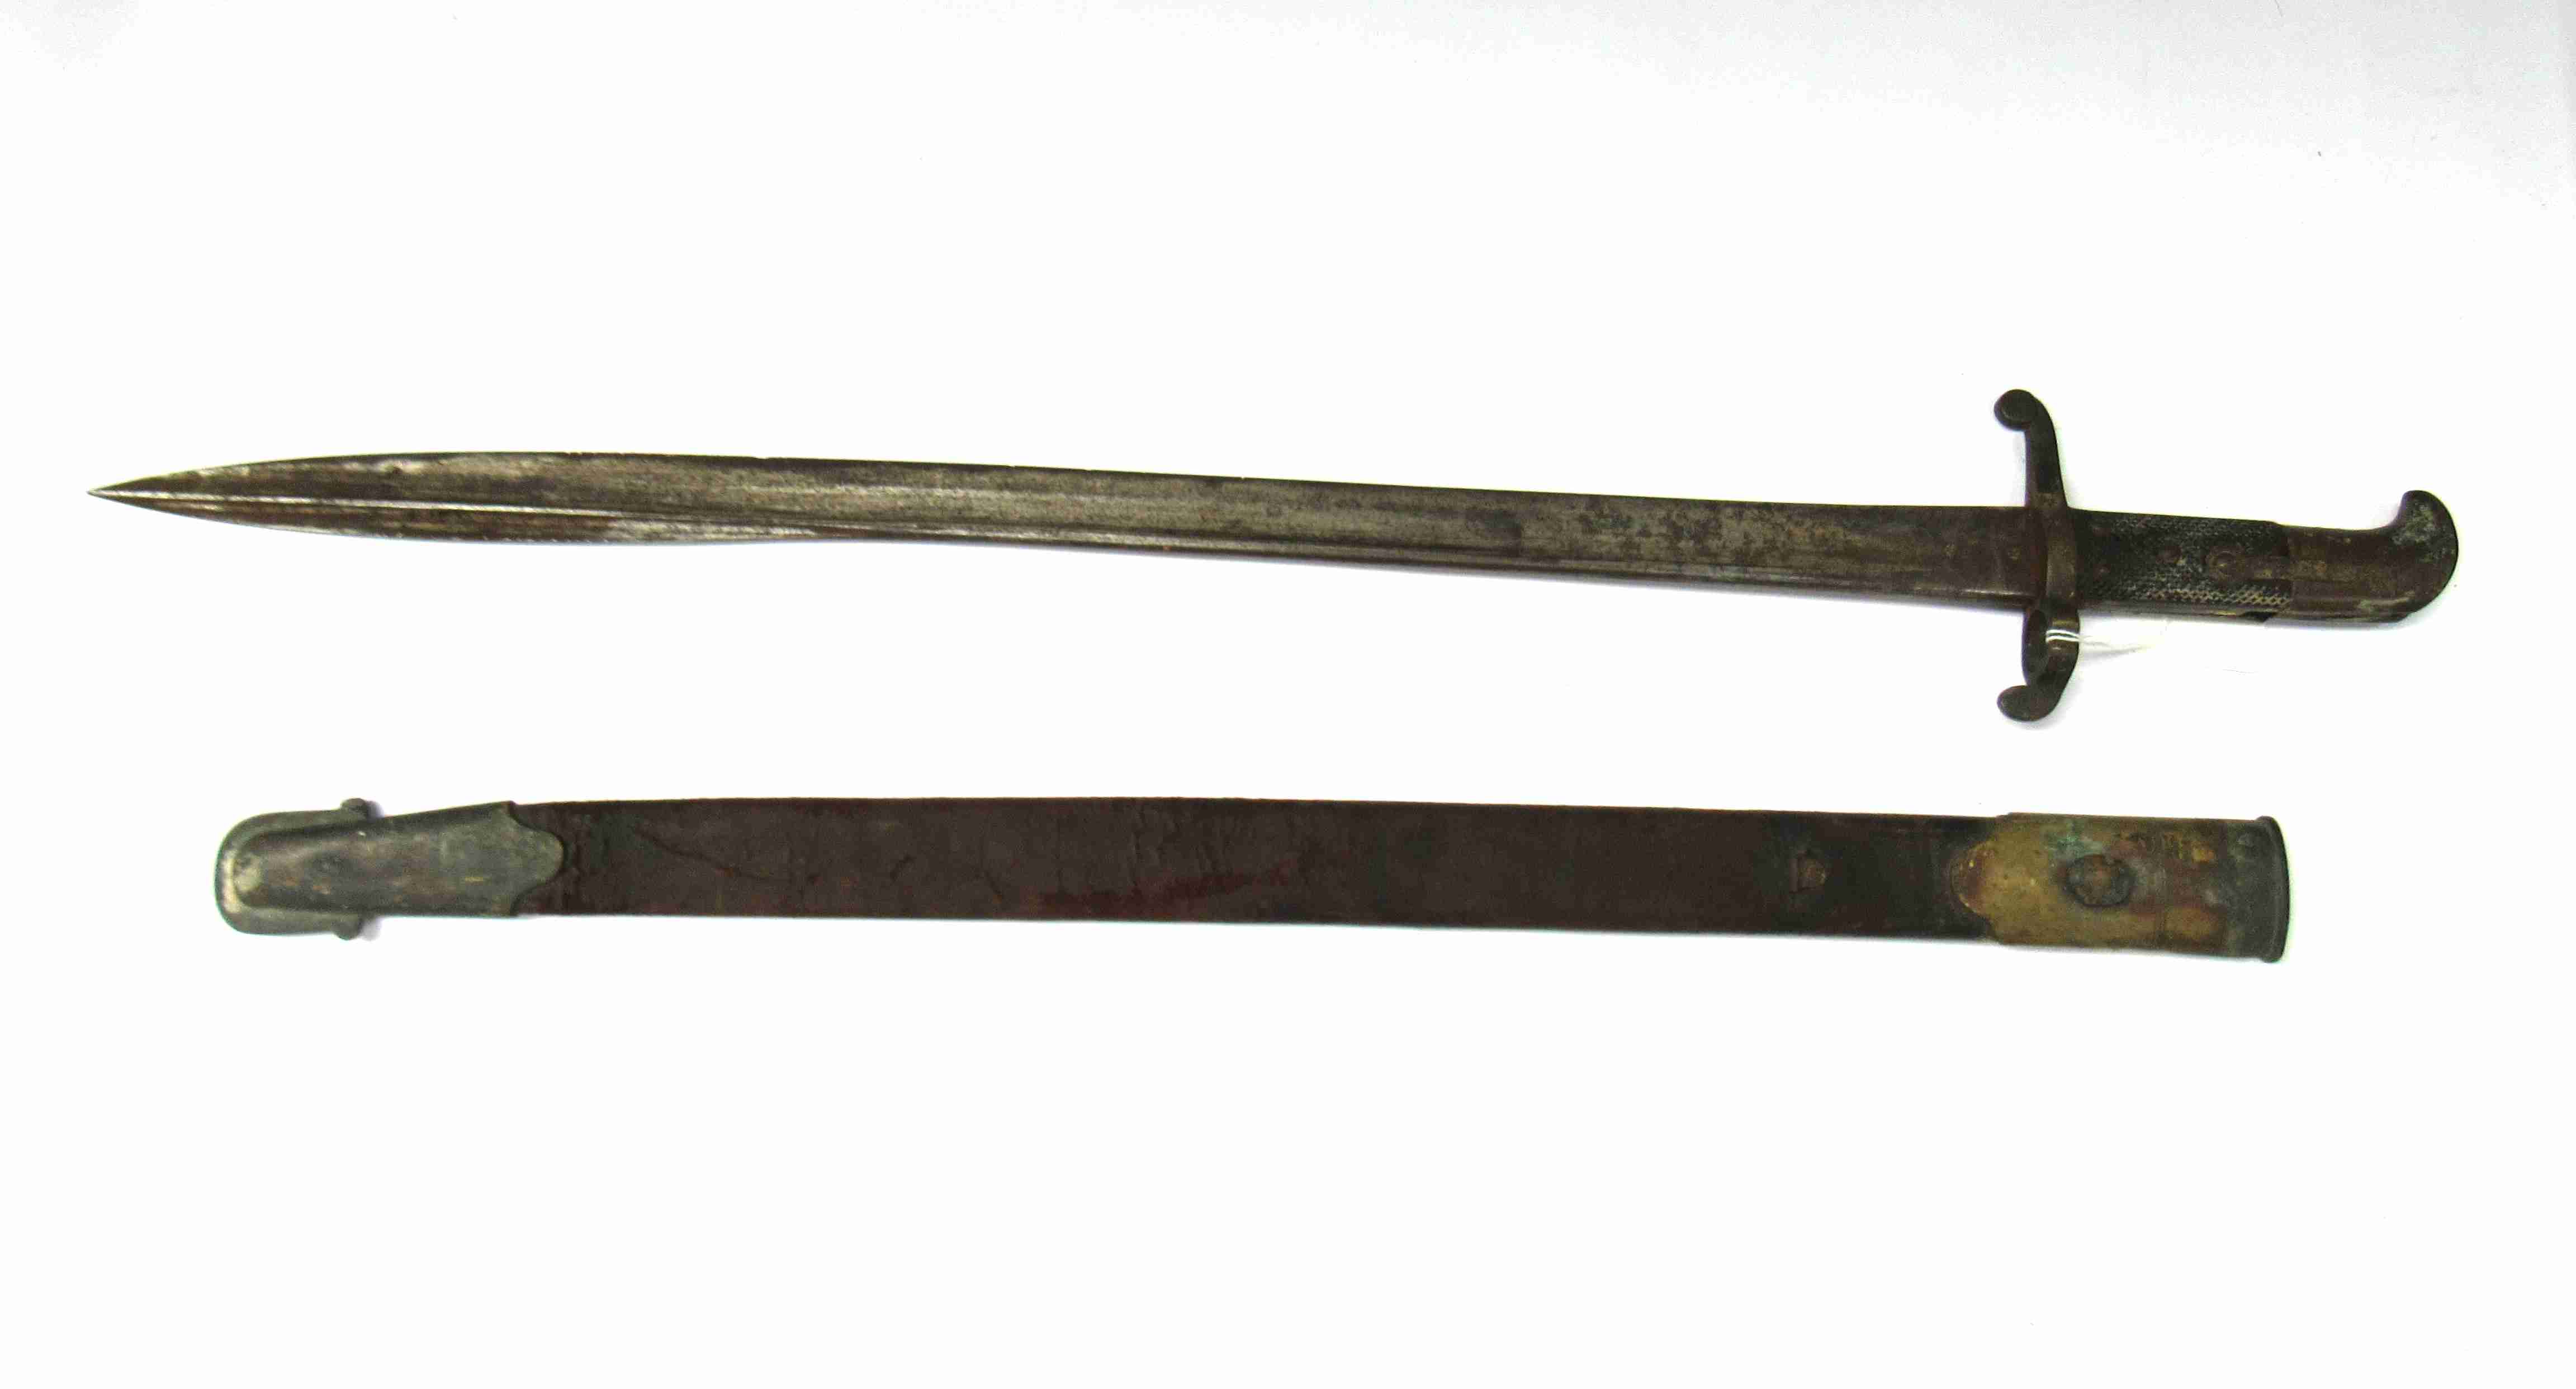 An 1855 pattern Lancaster sword bayonet with scabbard a/f - Image 3 of 3